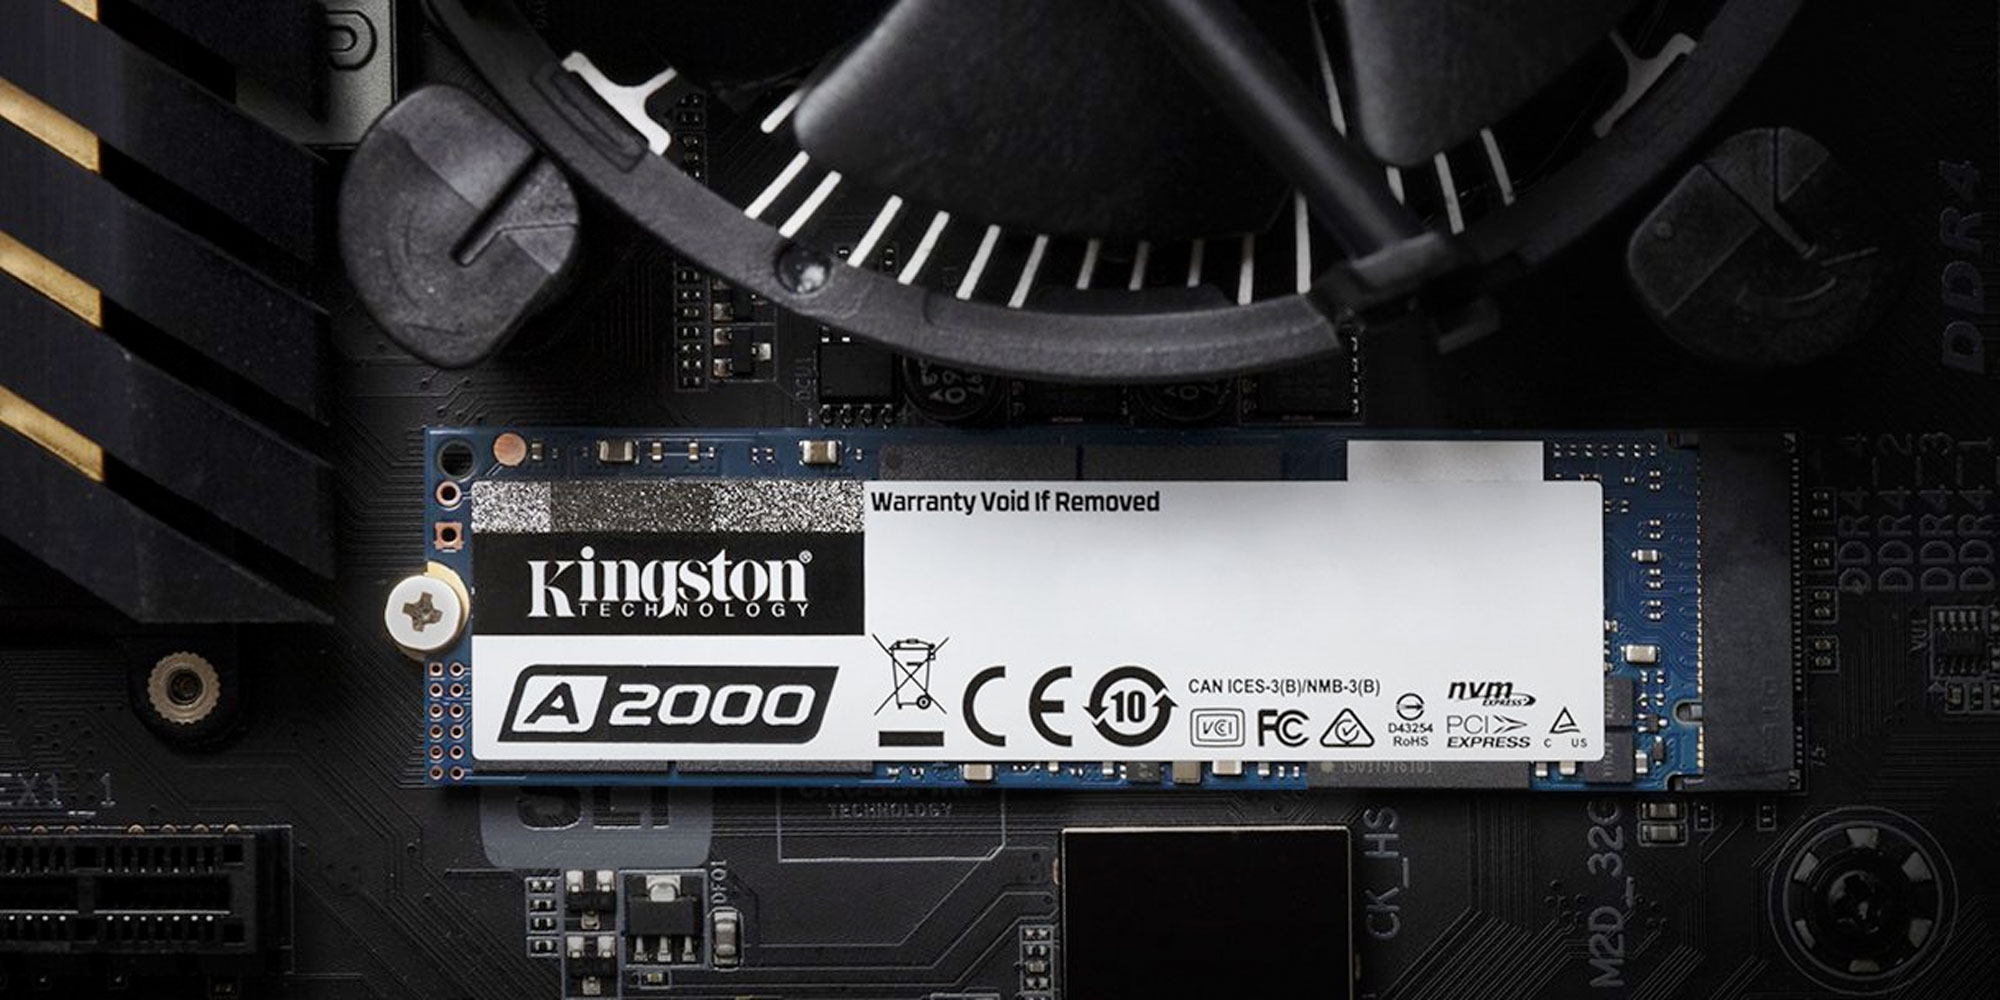 Kingston's A2000 NVMe offers 2.2GB/s speeds -